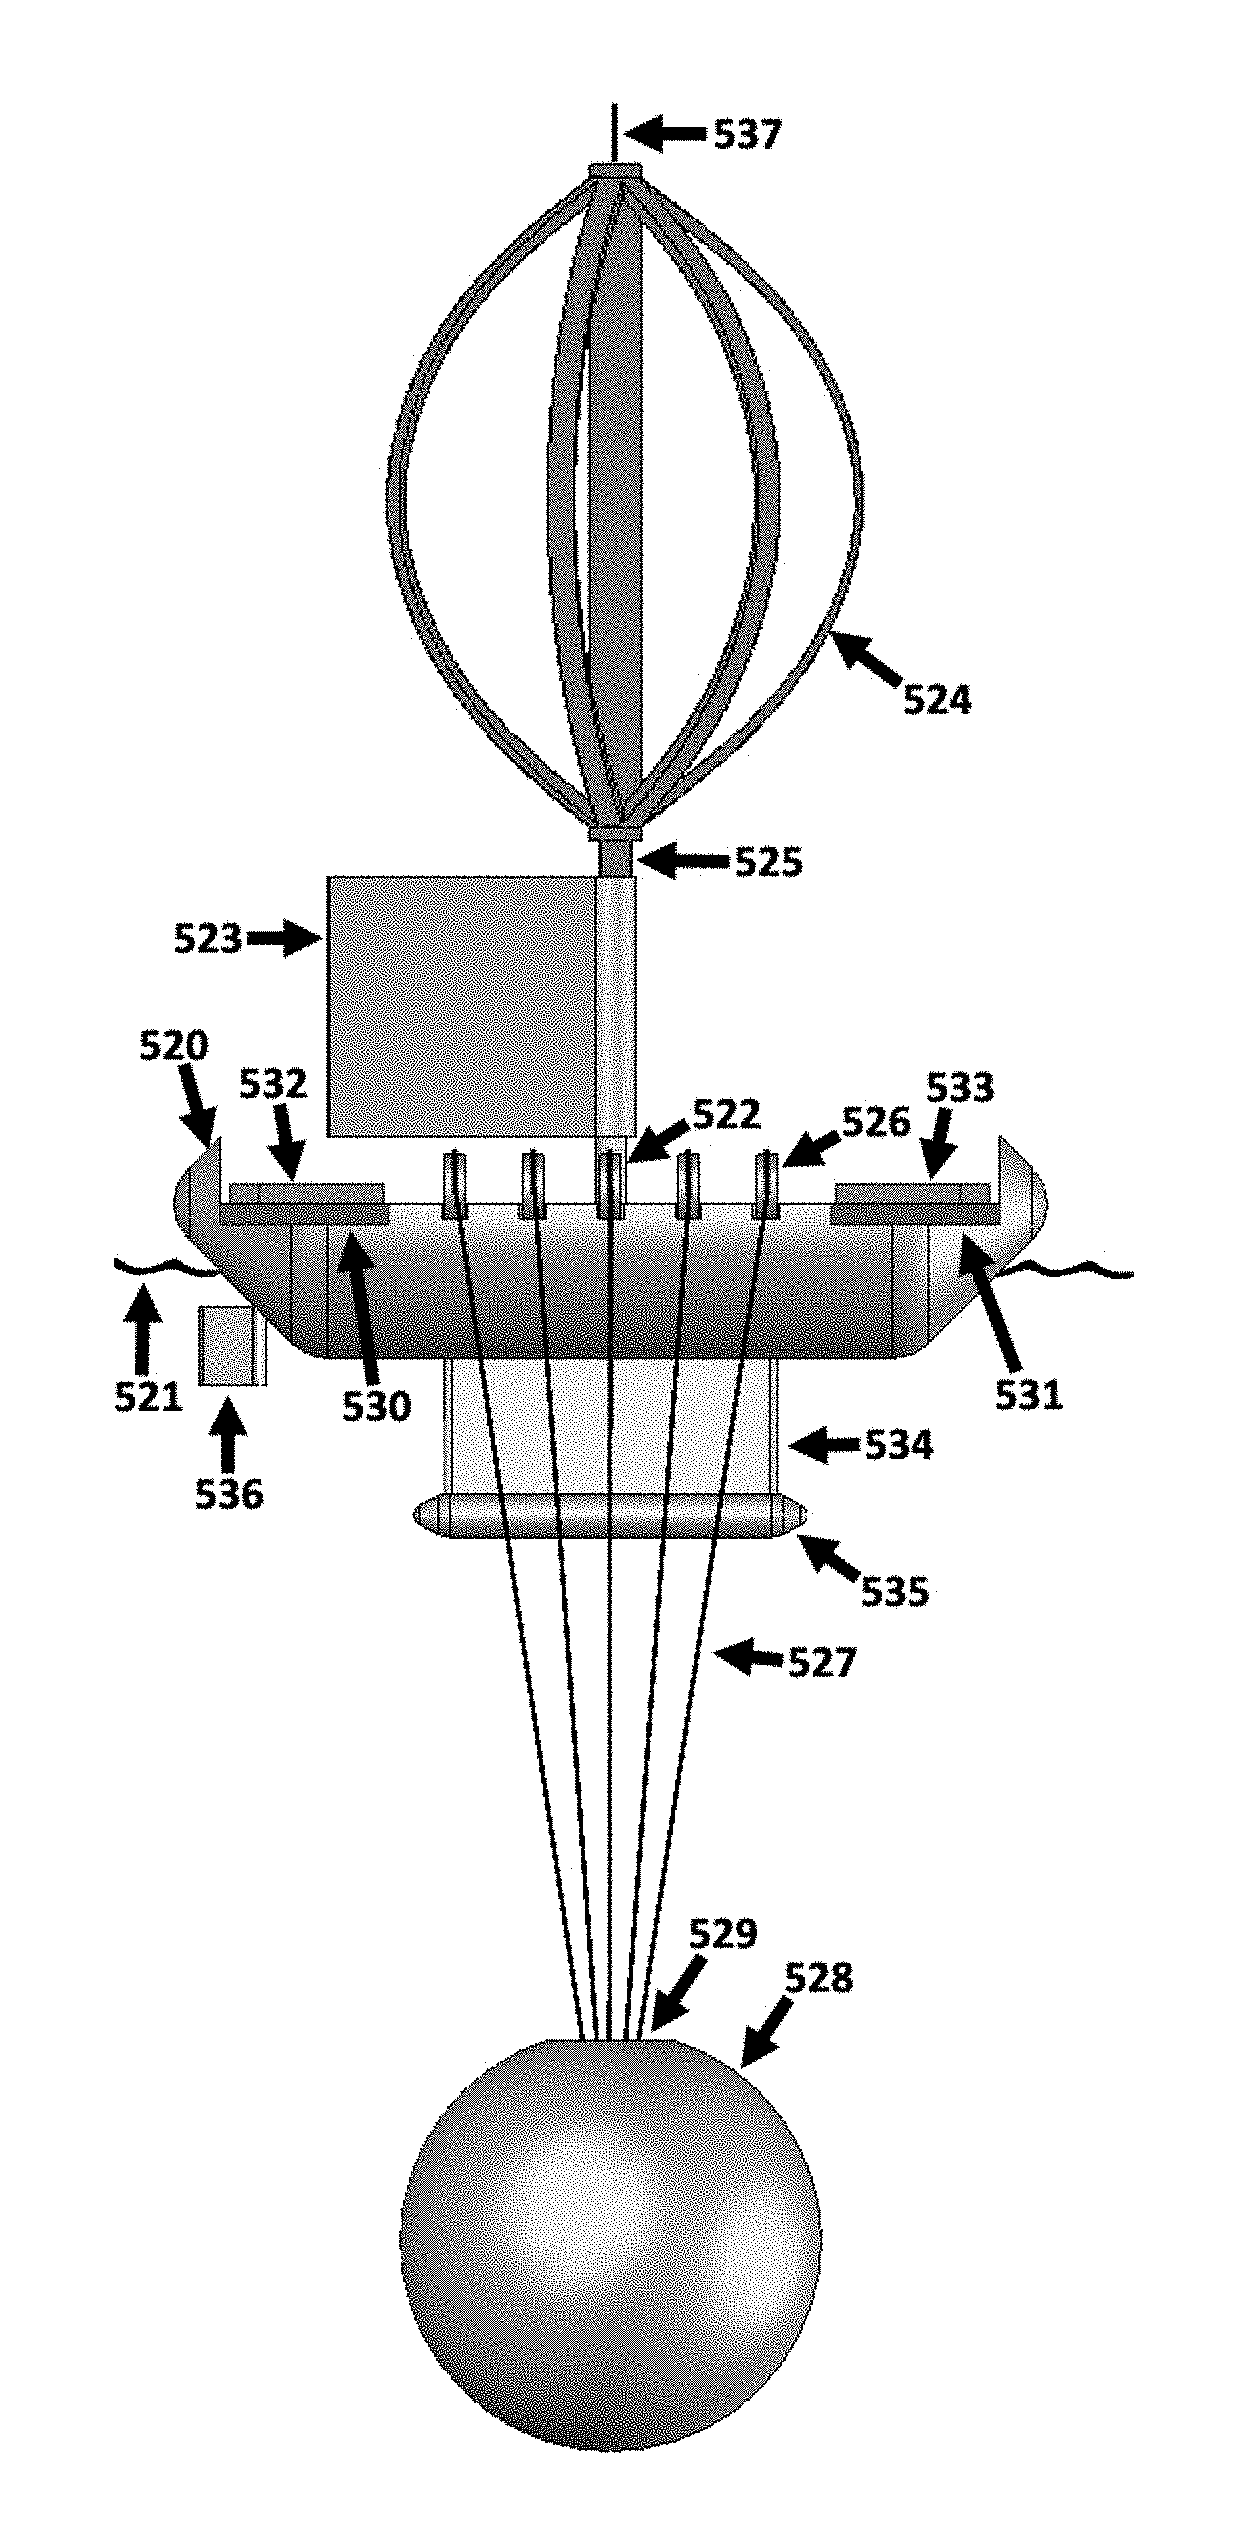 Self-propelled buoyant energy converter and method for deploying same